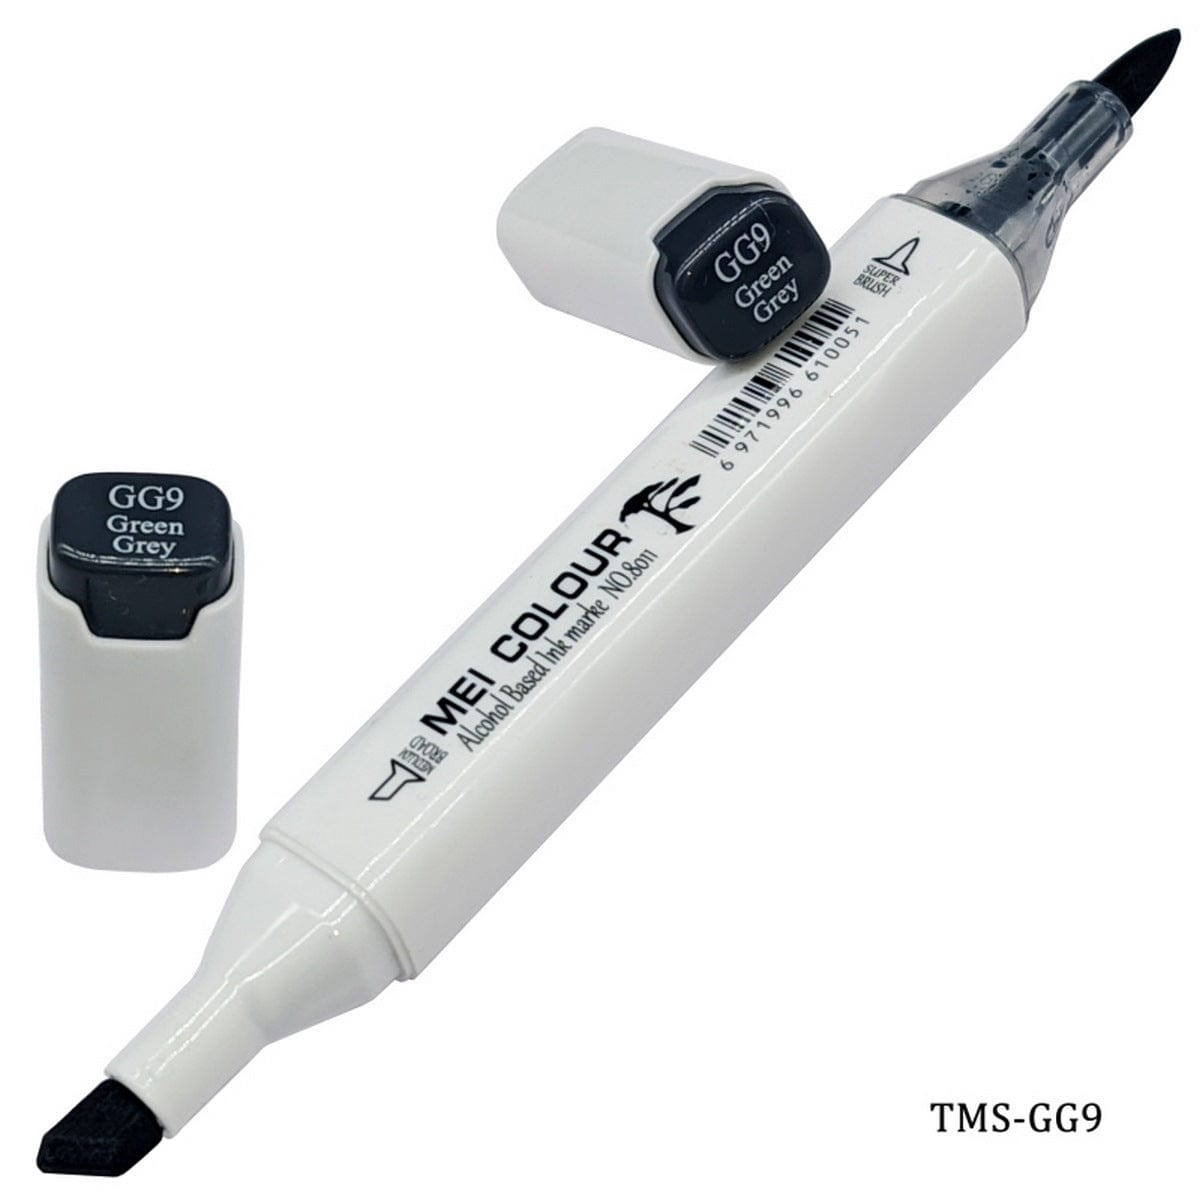 jags-mumbai Marker Touch Marker Soft 2in1 Pen Green Grey TMS-GG9